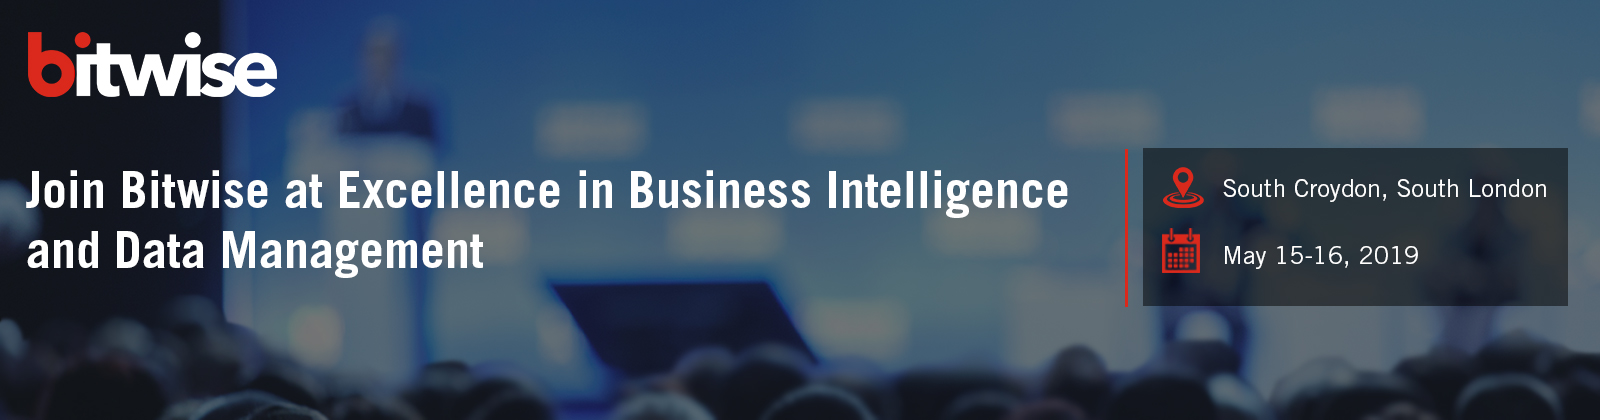 Join us at Excellence in Business Intelligence and Data Management